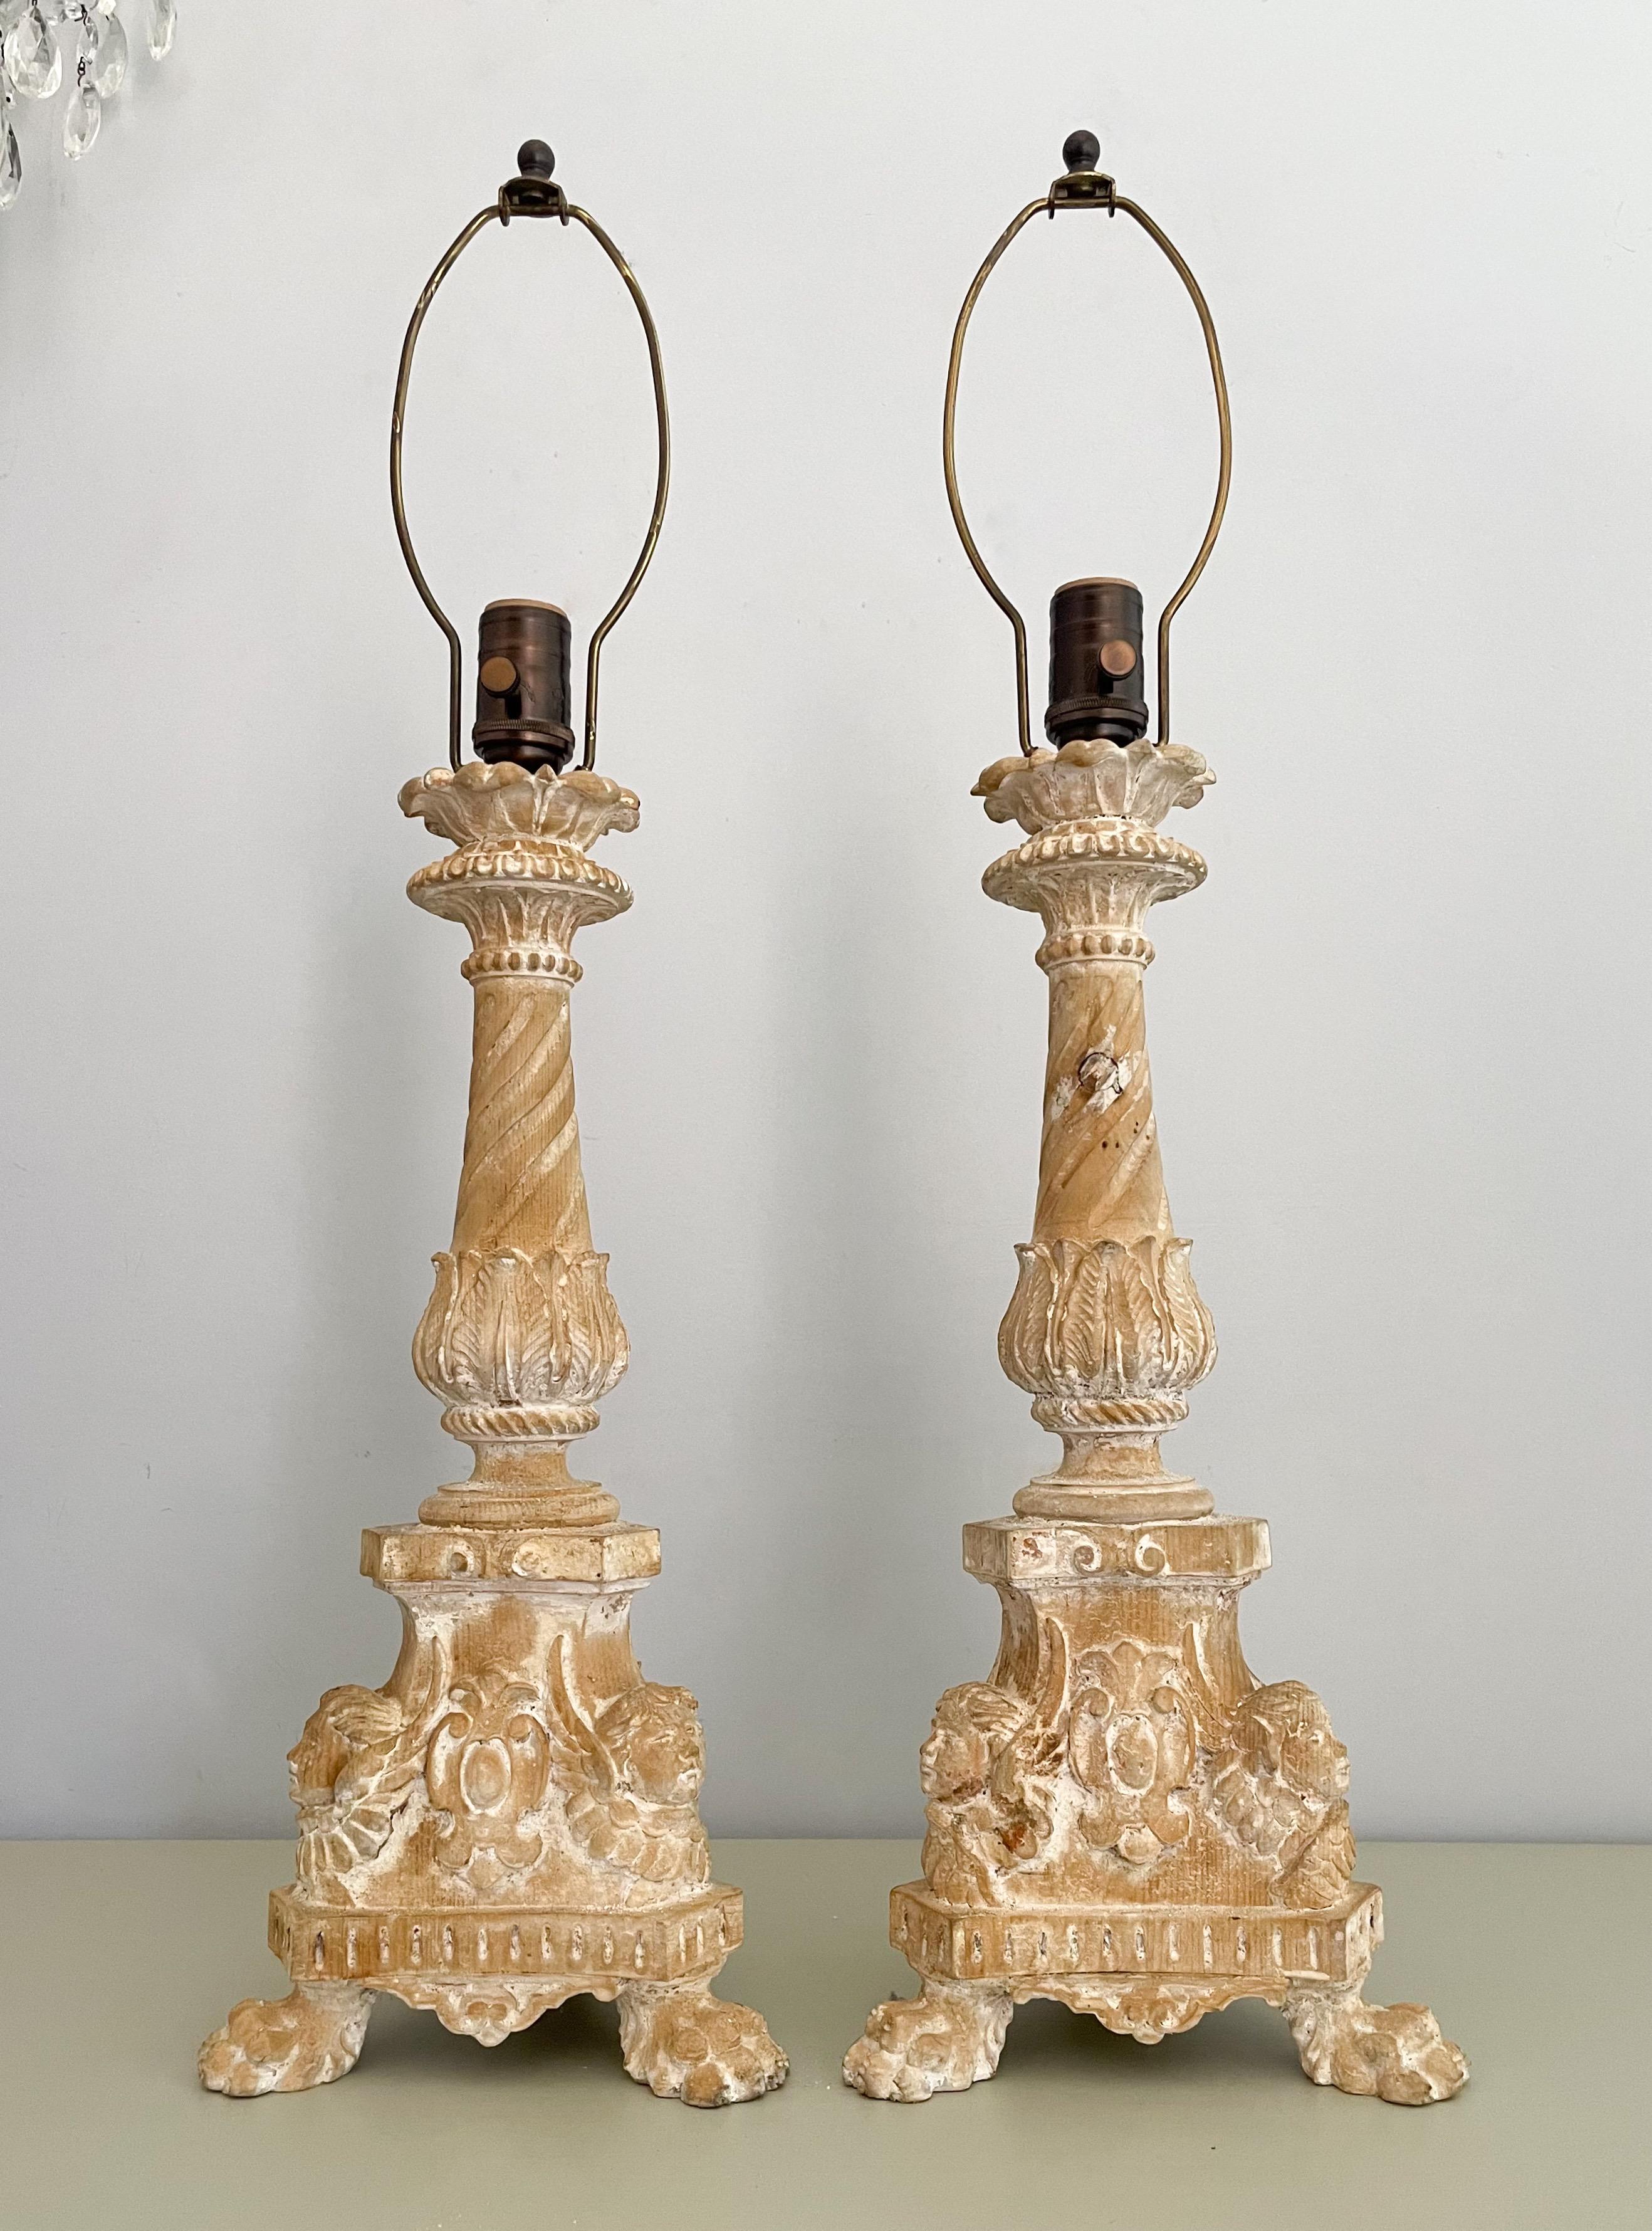 Beautiful, antique Italian carved wood candlestick lamps in the Baroque style.

Each lamp is made of solid wood with highly detailed carvings including a base with cherubs, crests and lion paw feet. 

Height of carved wood body is 18”

Small